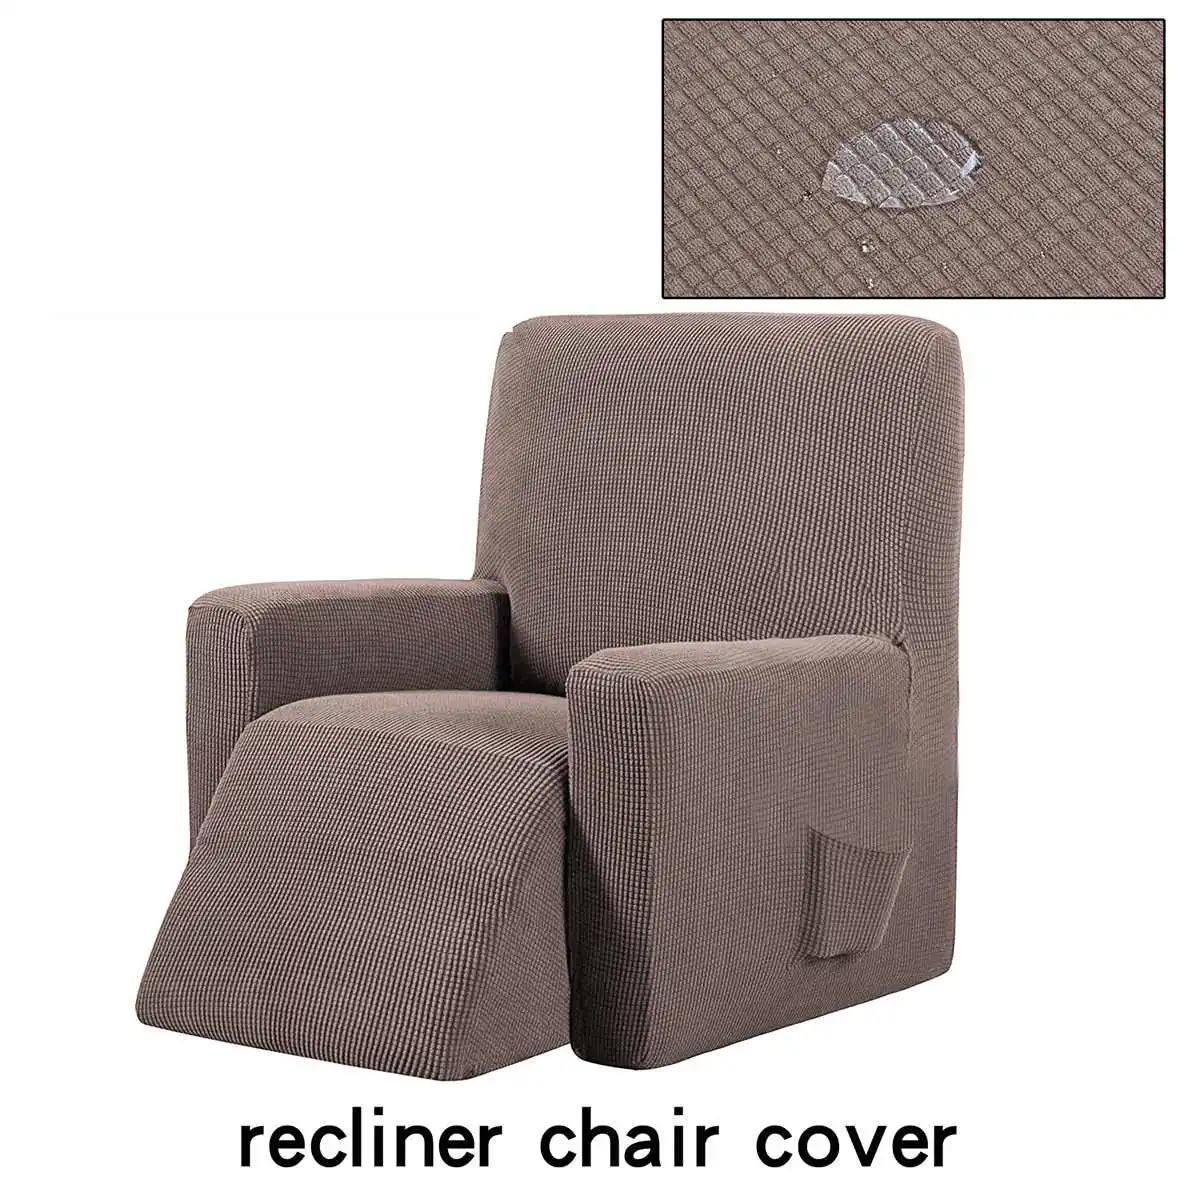 Recliner Couch Cover All-inclusive Sofa Cover Elasticity Stretch Anti-slip Furniture Slipcovers Chair Protector Single Seat Sofa - Цвет: Light coffee